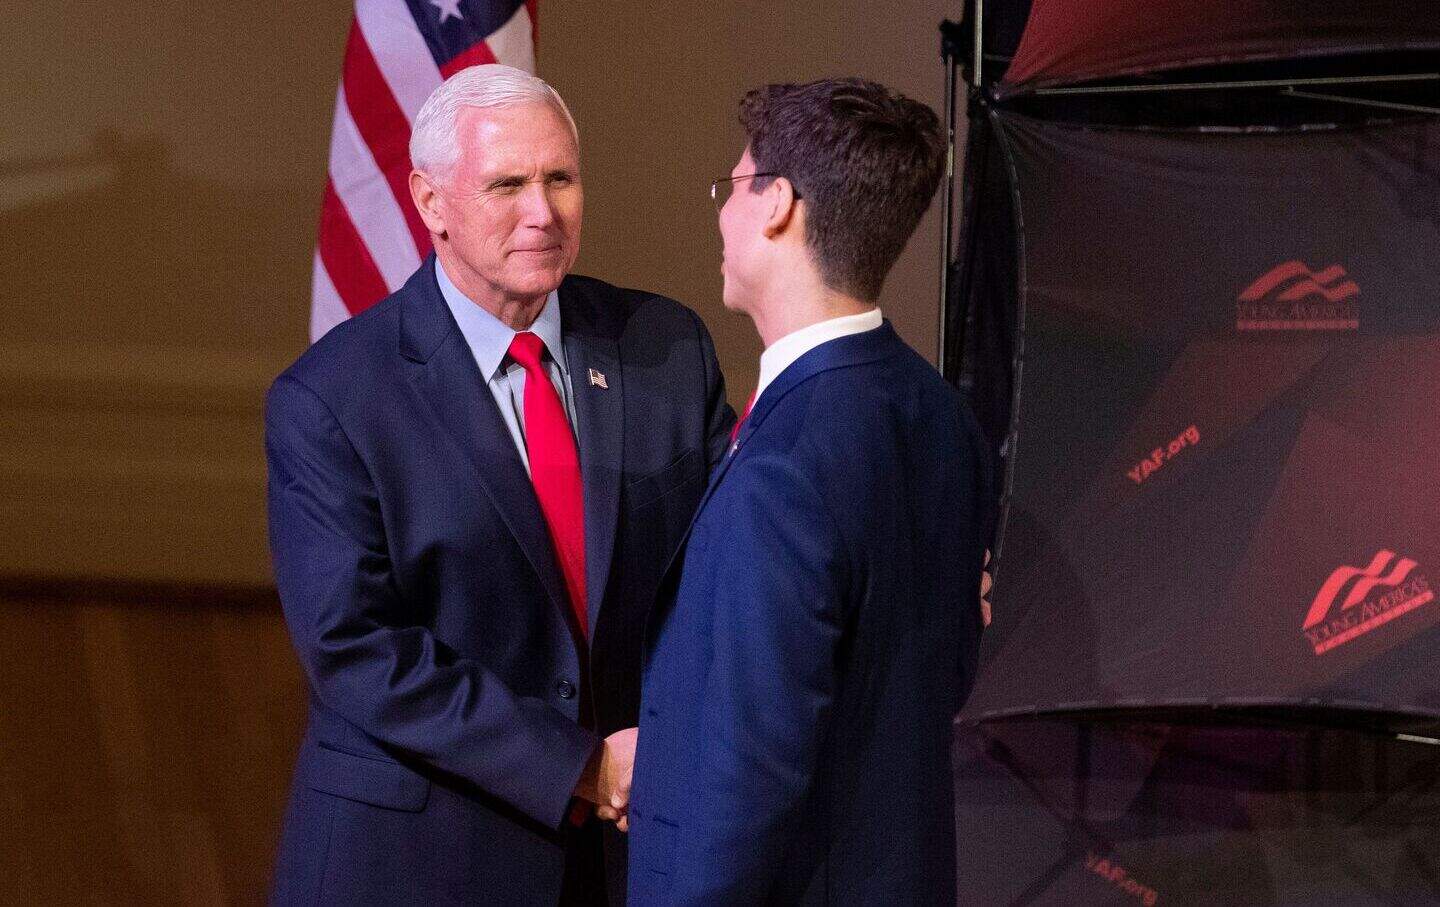 Former US vice president Mike Pence (L) is greeted by Young Americans for Freedom chair Nick Cabrera